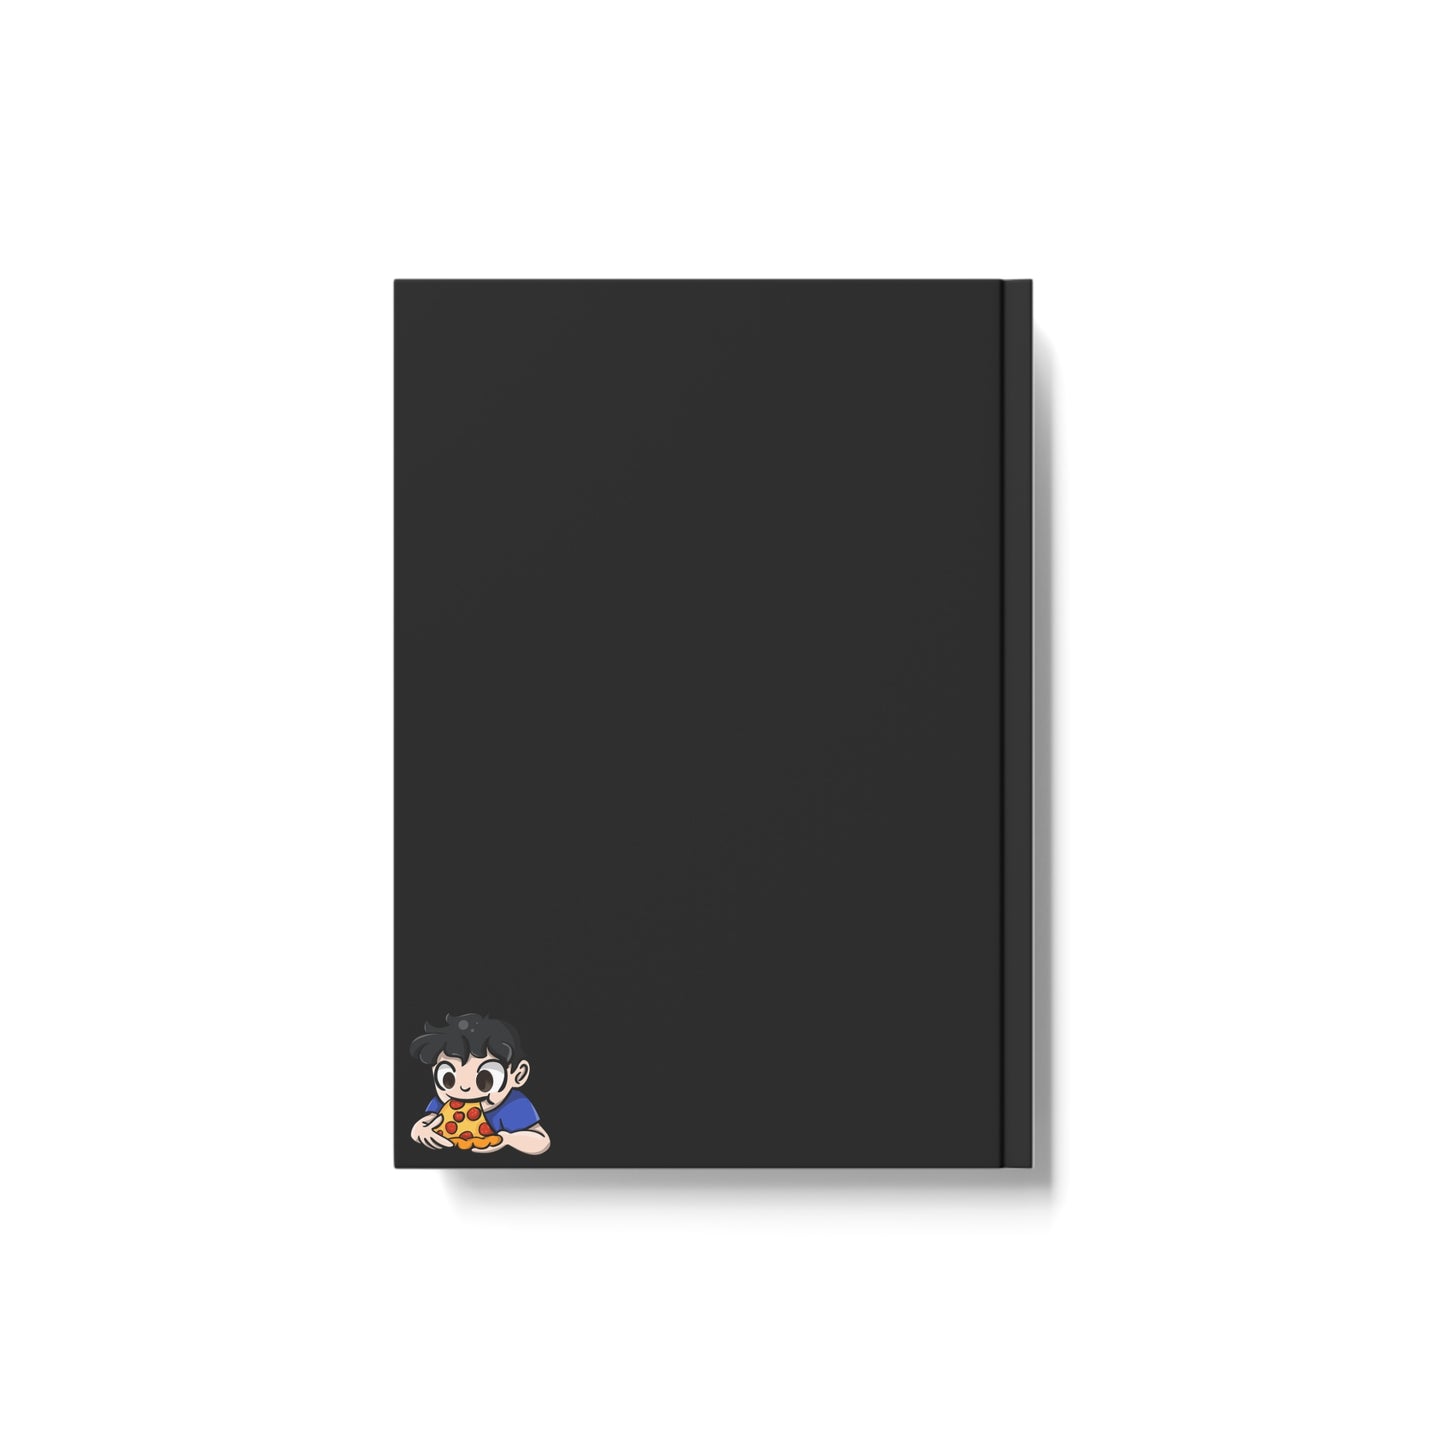 "Player Notebook" - Hard Backed Journal (Blank)